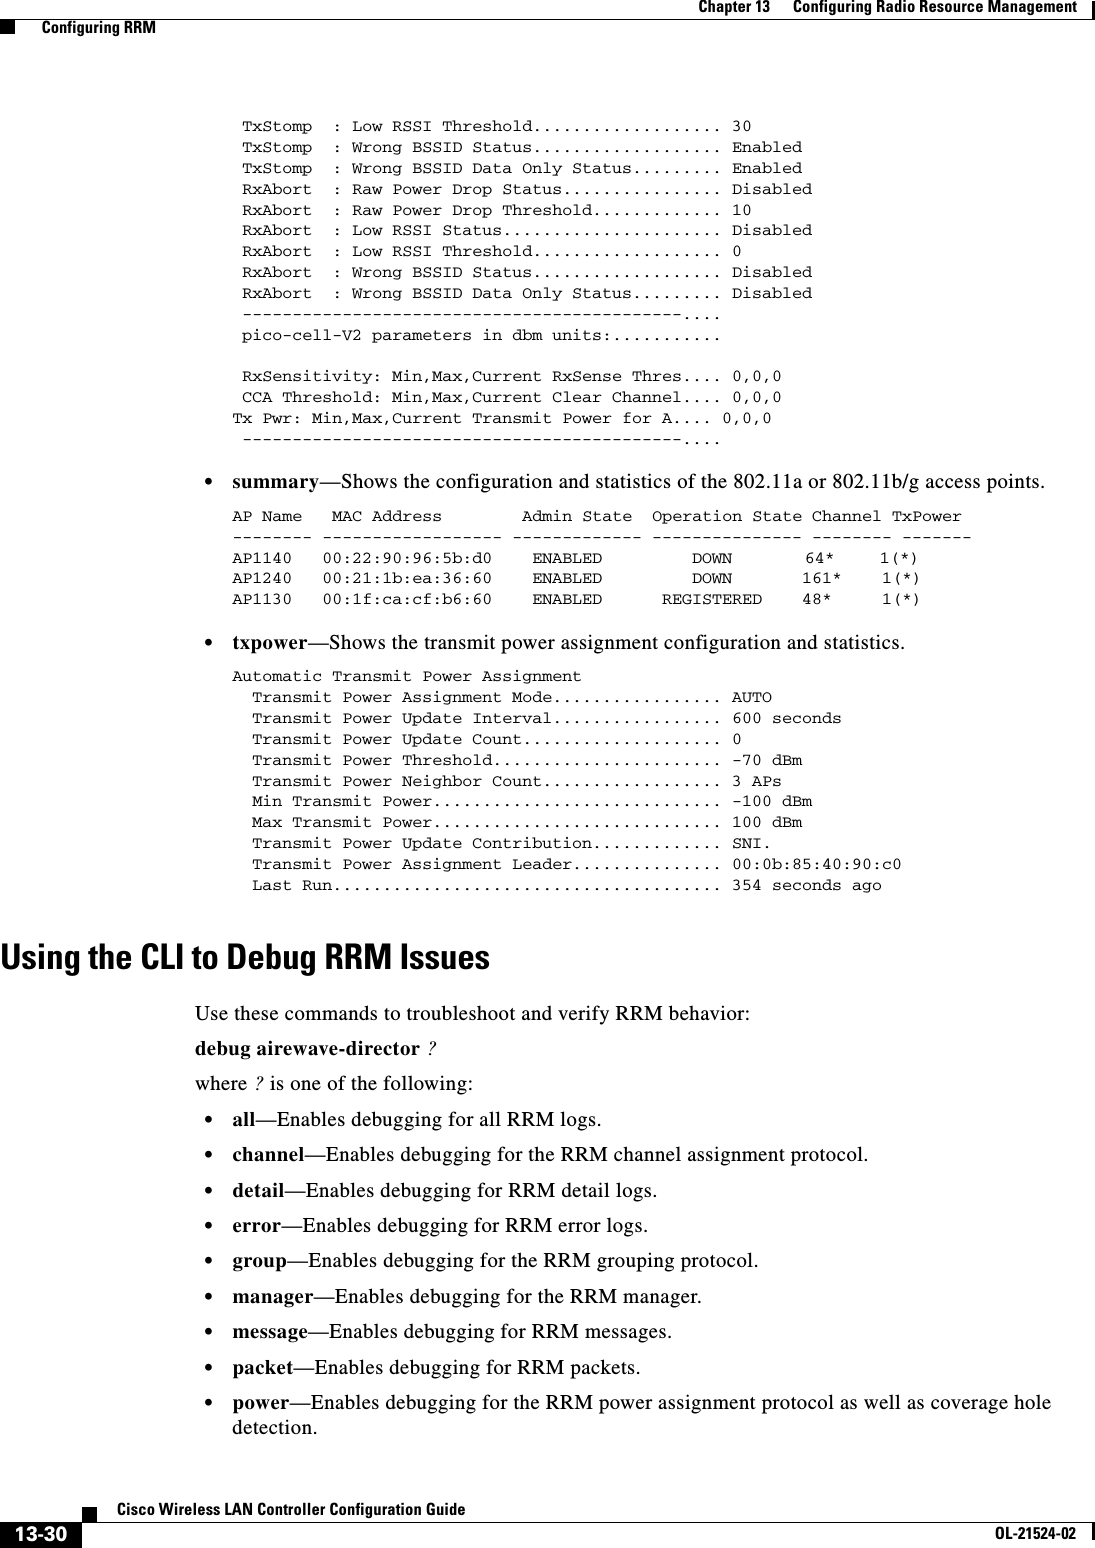  13-30Cisco Wireless LAN Controller Configuration GuideOL-21524-02Chapter 13      Configuring Radio Resource Management  Configuring RRM TxStomp  : Low RSSI Threshold................... 30 TxStomp  : Wrong BSSID Status................... Enabled TxStomp  : Wrong BSSID Data Only Status......... Enabled RxAbort  : Raw Power Drop Status................ Disabled RxAbort  : Raw Power Drop Threshold............. 10 RxAbort  : Low RSSI Status...................... Disabled RxAbort  : Low RSSI Threshold................... 0 RxAbort  : Wrong BSSID Status................... Disabled RxAbort  : Wrong BSSID Data Only Status......... Disabled --------------------------------------------.... pico-cell-V2 parameters in dbm units:........... RxSensitivity: Min,Max,Current RxSense Thres.... 0,0,0 CCA Threshold: Min,Max,Current Clear Channel.... 0,0,0Tx Pwr: Min,Max,Current Transmit Power for A.... 0,0,0 --------------------------------------------....   • summary—Shows the configuration and statistics of the 802.11a or 802.11b/g access points.AP Name   MAC Address        Admin State  Operation State Channel TxPower-------- ------------------ ------------- --------------- -------- -------AP1140   00:22:90:96:5b:d0    ENABLED         DOWN      64*    1(*)AP1240   00:21:1b:ea:36:60    ENABLED         DOWN       161*    1(*)AP1130   00:1f:ca:cf:b6:60    ENABLED      REGISTERED    48*     1(*)   • txpower—Shows the transmit power assignment configuration and statistics.Automatic Transmit Power Assignment  Transmit Power Assignment Mode................. AUTO  Transmit Power Update Interval................. 600 seconds  Transmit Power Update Count.................... 0  Transmit Power Threshold....................... -70 dBm  Transmit Power Neighbor Count.................. 3 APs  Min Transmit Power............................. -100 dBm  Max Transmit Power............................. 100 dBm  Transmit Power Update Contribution............. SNI.  Transmit Power Assignment Leader............... 00:0b:85:40:90:c0  Last Run....................................... 354 seconds agoUsing the CLI to Debug RRM IssuesUse these commands to troubleshoot and verify RRM behavior:debug airewave-director ?where ? is one of the following:  • all—Enables debugging for all RRM logs.  • channel—Enables debugging for the RRM channel assignment protocol.  • detail—Enables debugging for RRM detail logs.  • error—Enables debugging for RRM error logs.  • group—Enables debugging for the RRM grouping protocol.  • manager—Enables debugging for the RRM manager.  • message—Enables debugging for RRM messages.  • packet—Enables debugging for RRM packets.  • power—Enables debugging for the RRM power assignment protocol as well as coverage hole detection.